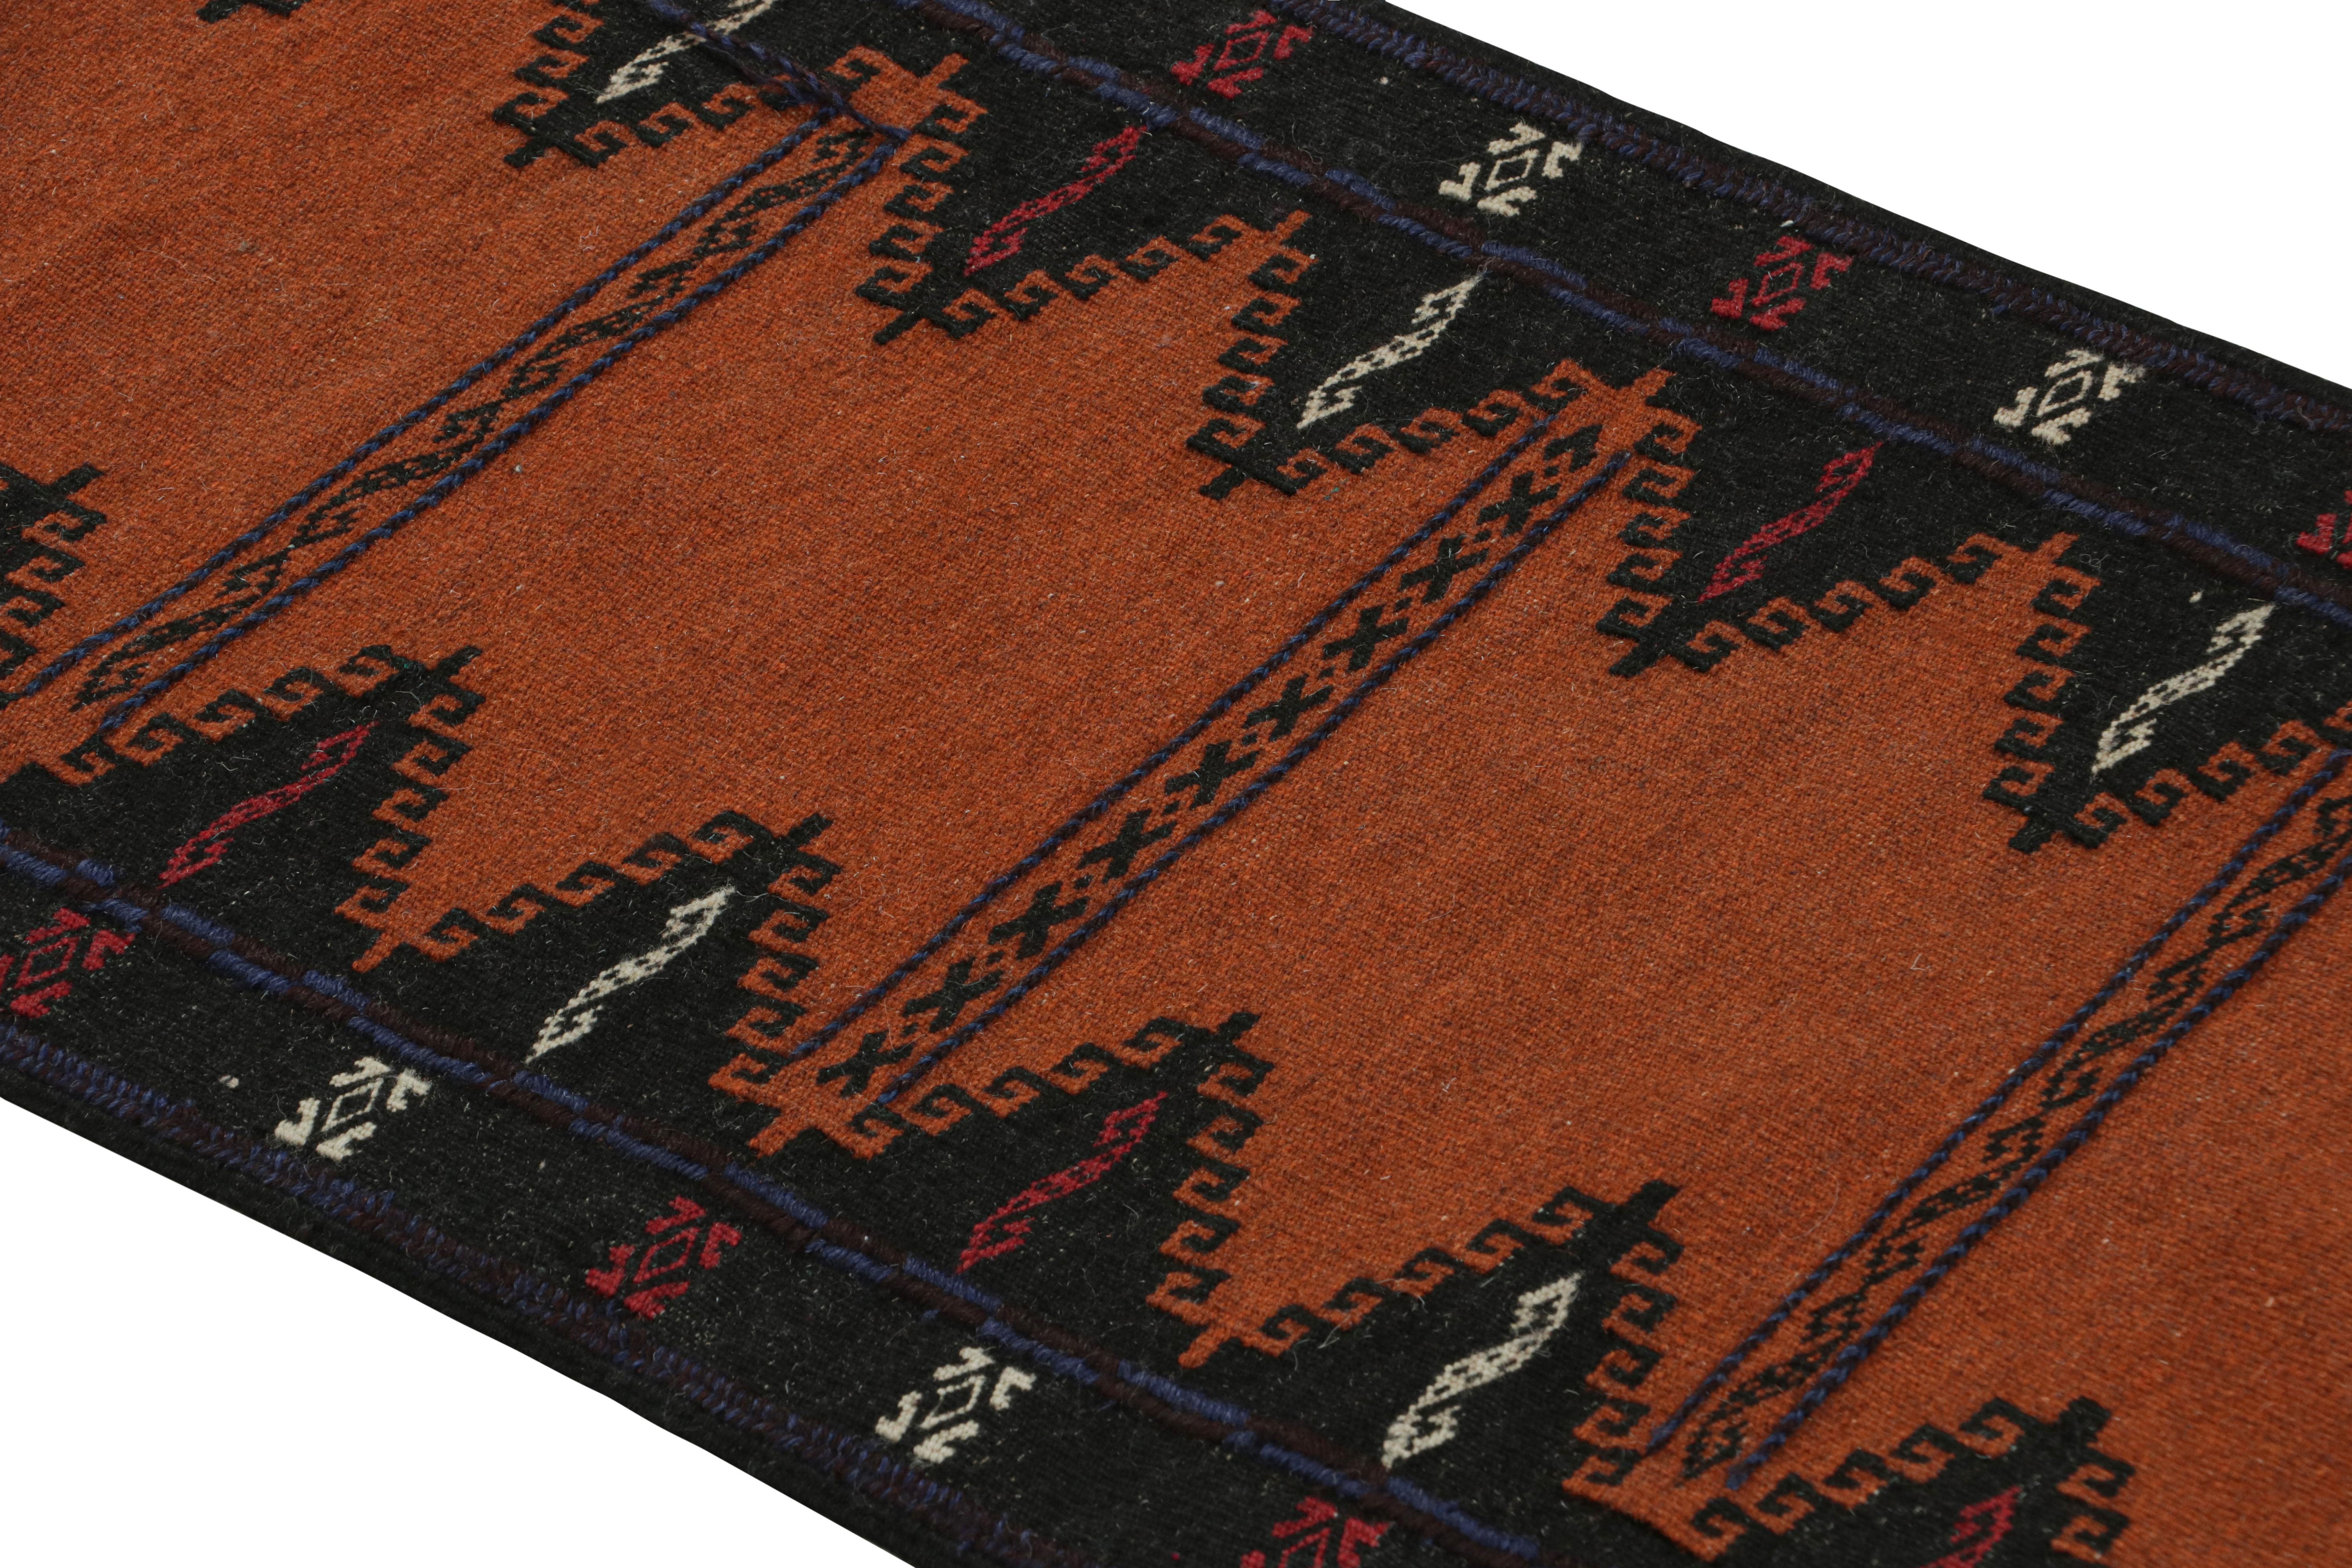 Handwoven in wool, circa 1950-1960, this 2×5 vintage Afghan tribal kilim rug, is a collectible tribal piece that may have been used as table covers in nomadic daily life, much similar to Persian Sofreh Kilims.

On the Design: 

Drawing on Afghan